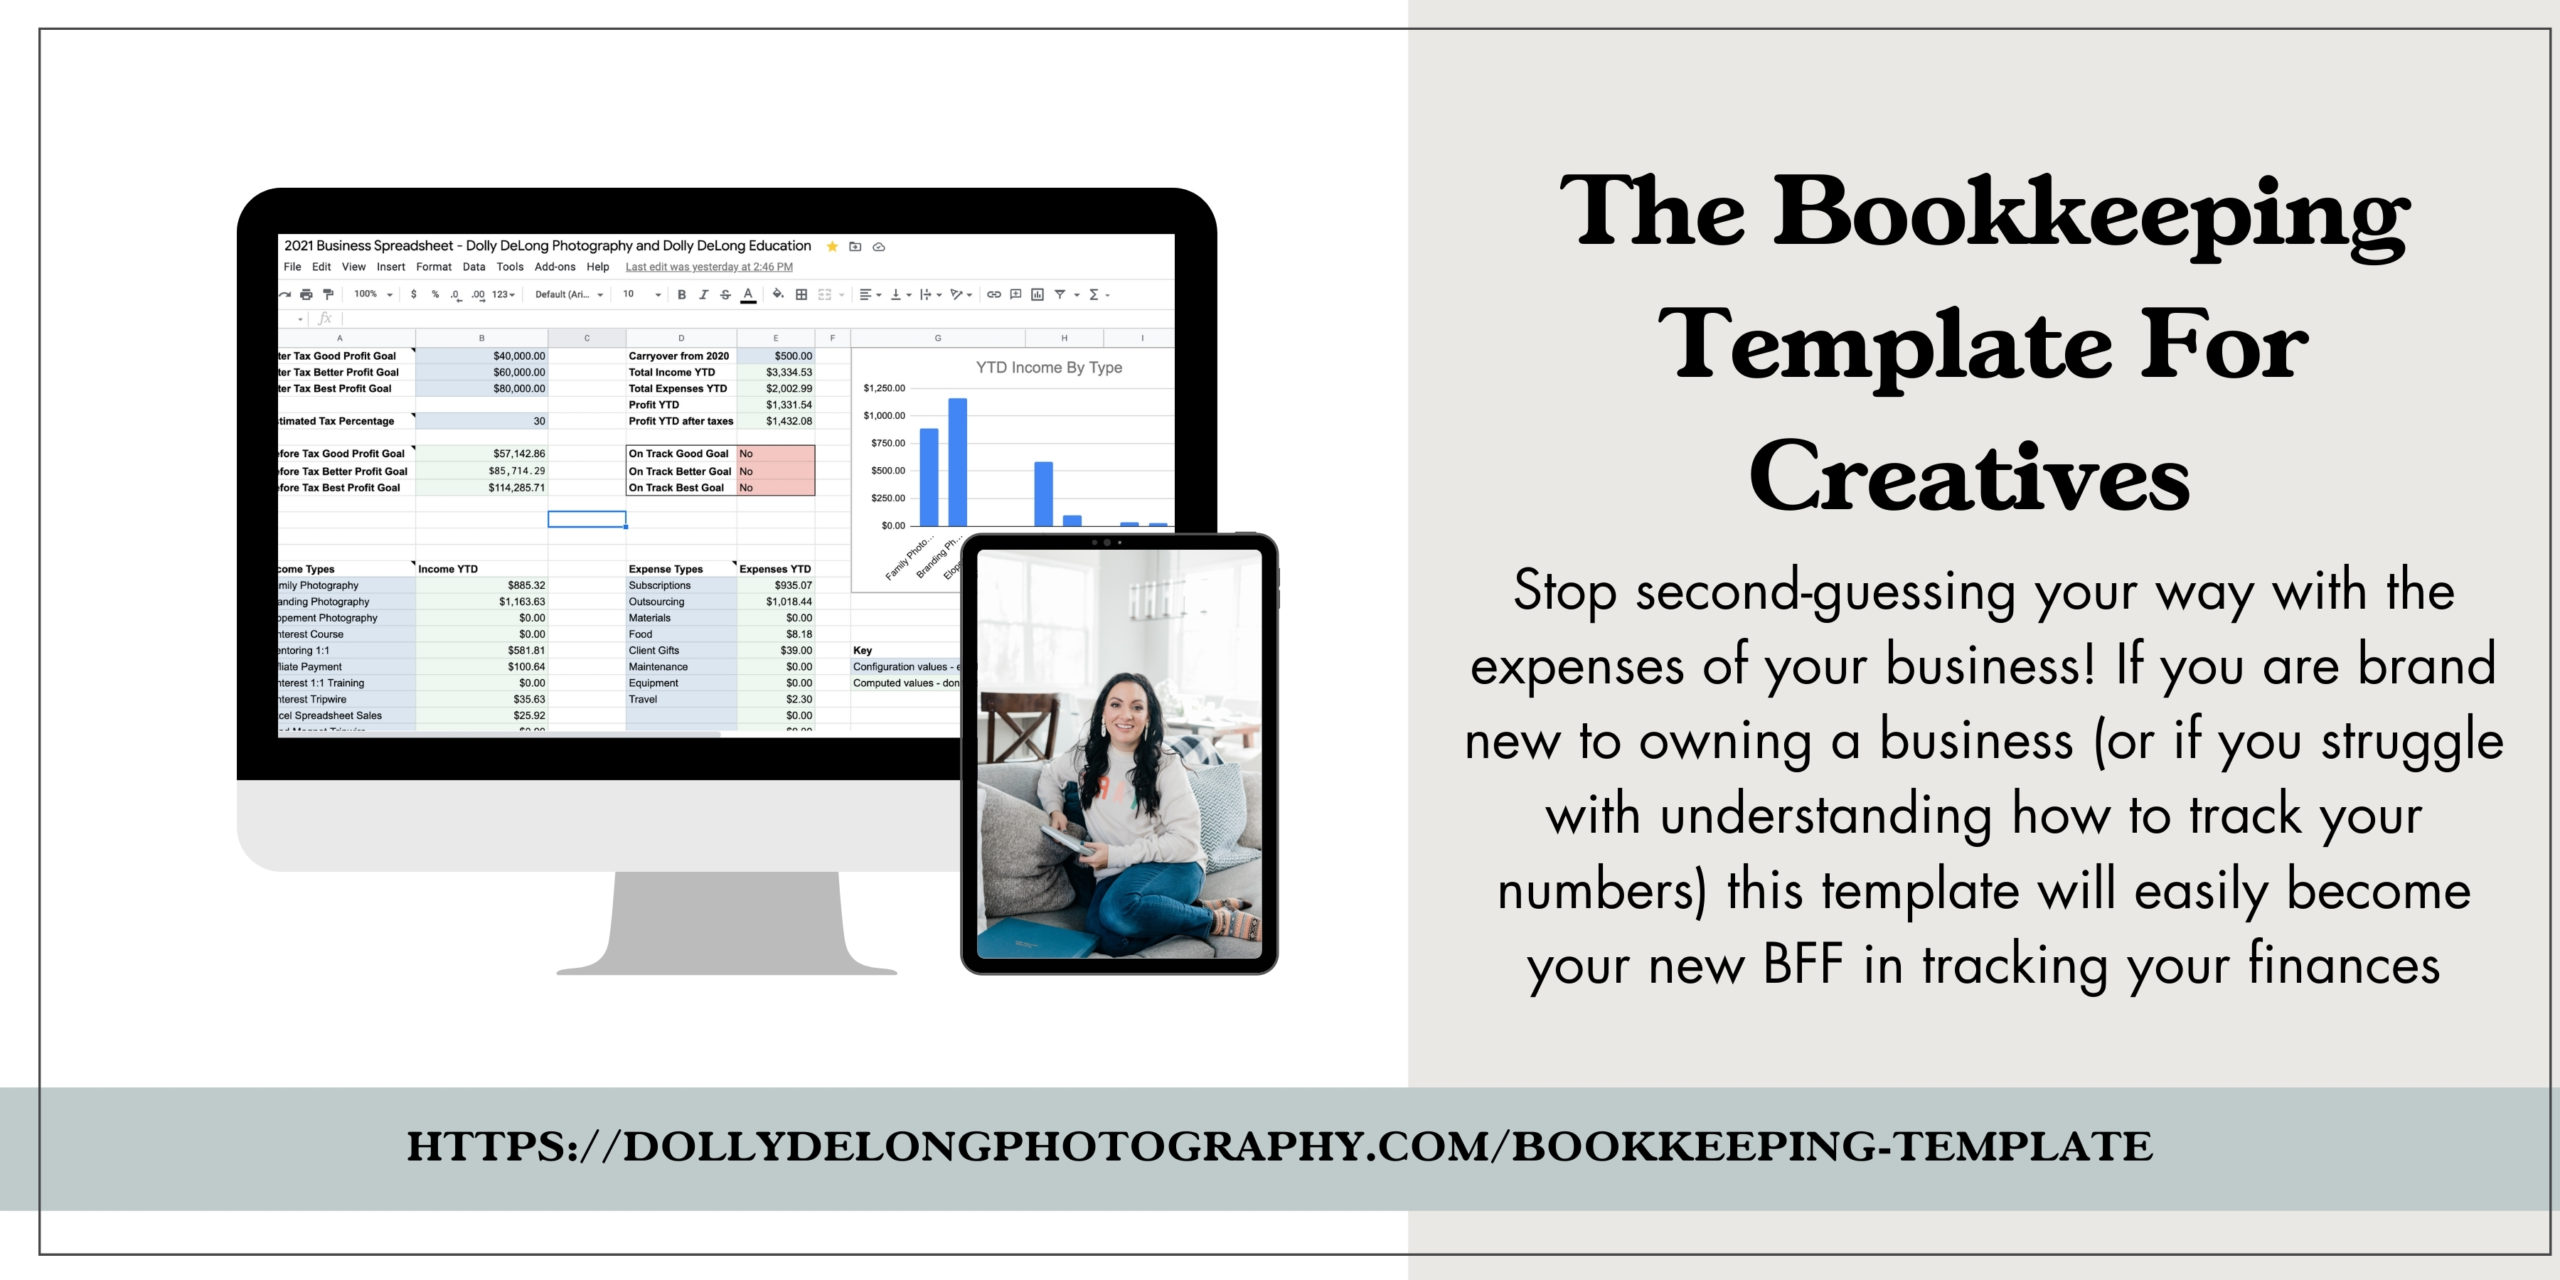 The Bookkeeping Template For Creatives by Dolly DeLong Education